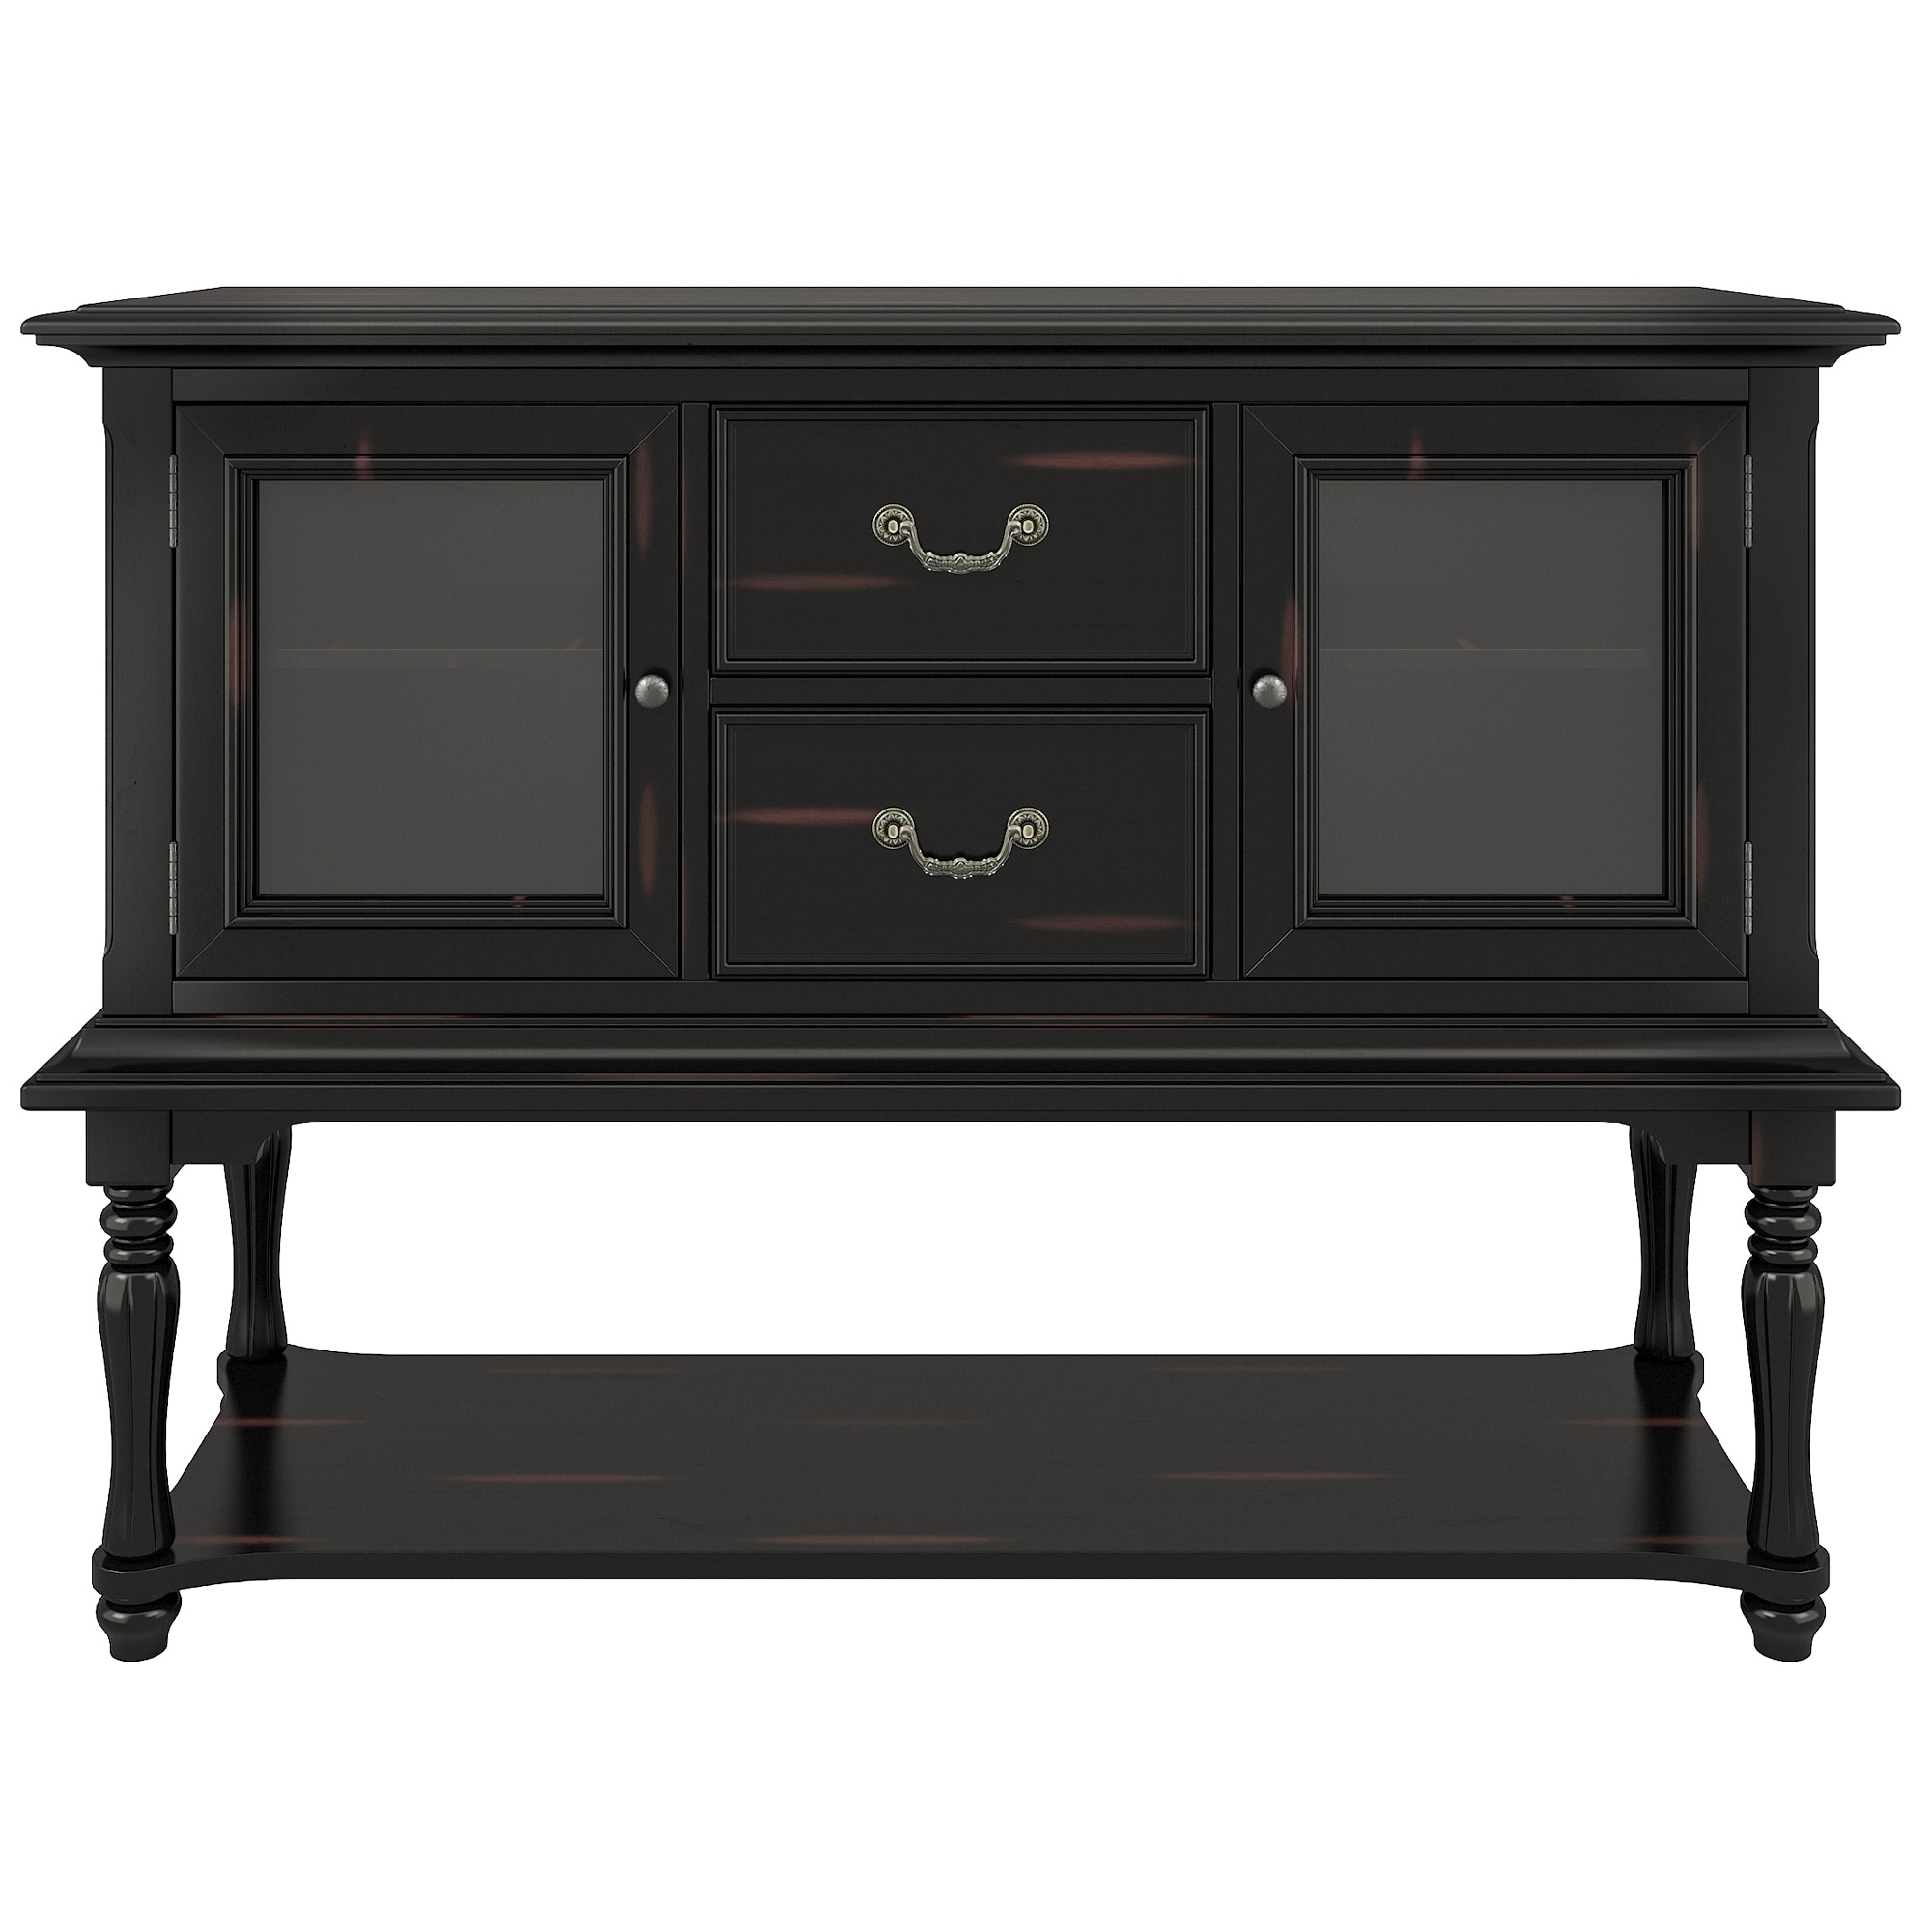 https://ak1.ostkcdn.com/images/products/is/images/direct/6ca2f38ce4bd72ffd2c6bee0e359925b1e135586/Console-Table-Solid-Wood-Legs-with-2-Drawers%2C-2-Glass-Doors-and-Bottom-Shelf.jpg